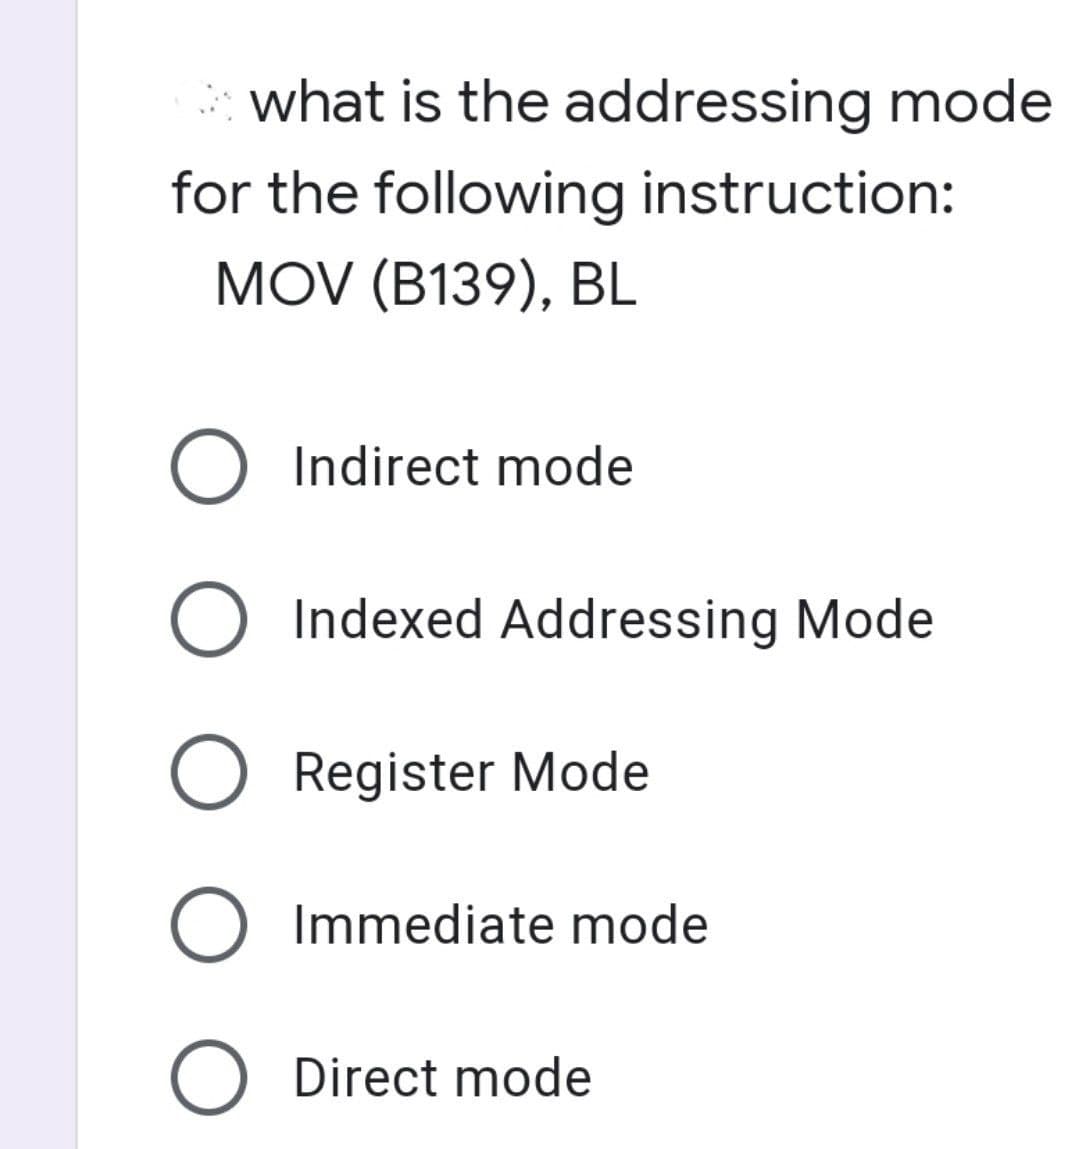 what is the addressing mode
for the following instruction:
MOV (B139), BL
O Indirect mode
O Indexed Addressing Mode
O Register Mode
O Immediate mode
O Direct mode